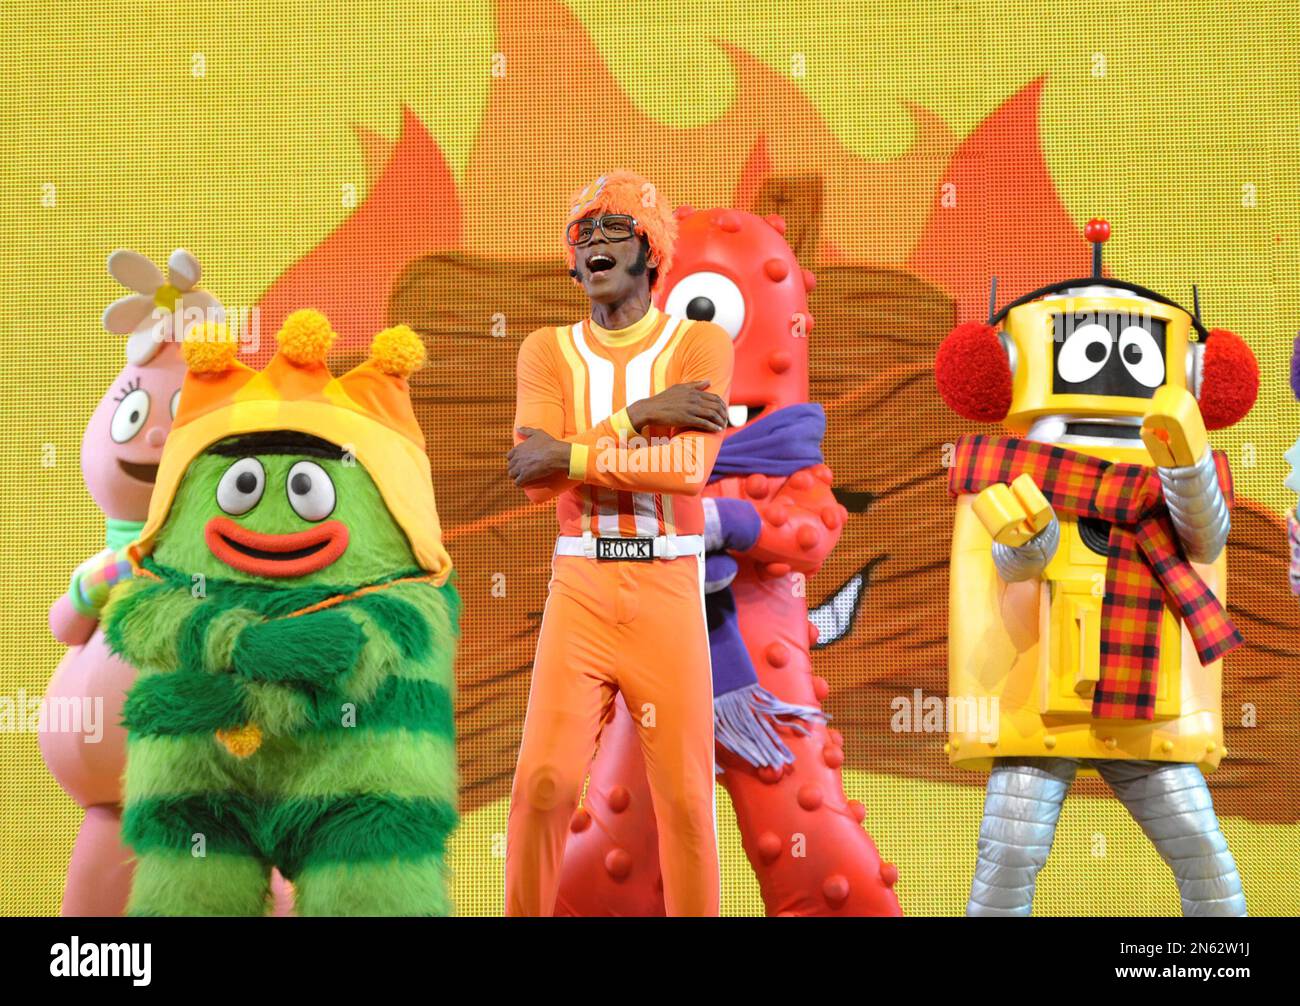 https://c8.alamy.com/comp/2N62W1J/dj-lance-rock-center-is-seen-with-foofa-brobee-muno-and-plex-at-a-very-awesome-yo-gabba-gabba!-live!-holiday-show-on-saturday-nov-30-2013-at-nokia-theater-la-live-in-los-angeles-photo-by-john-shearerinvision-for-gabbacadabra-llcap-images-2N62W1J.jpg